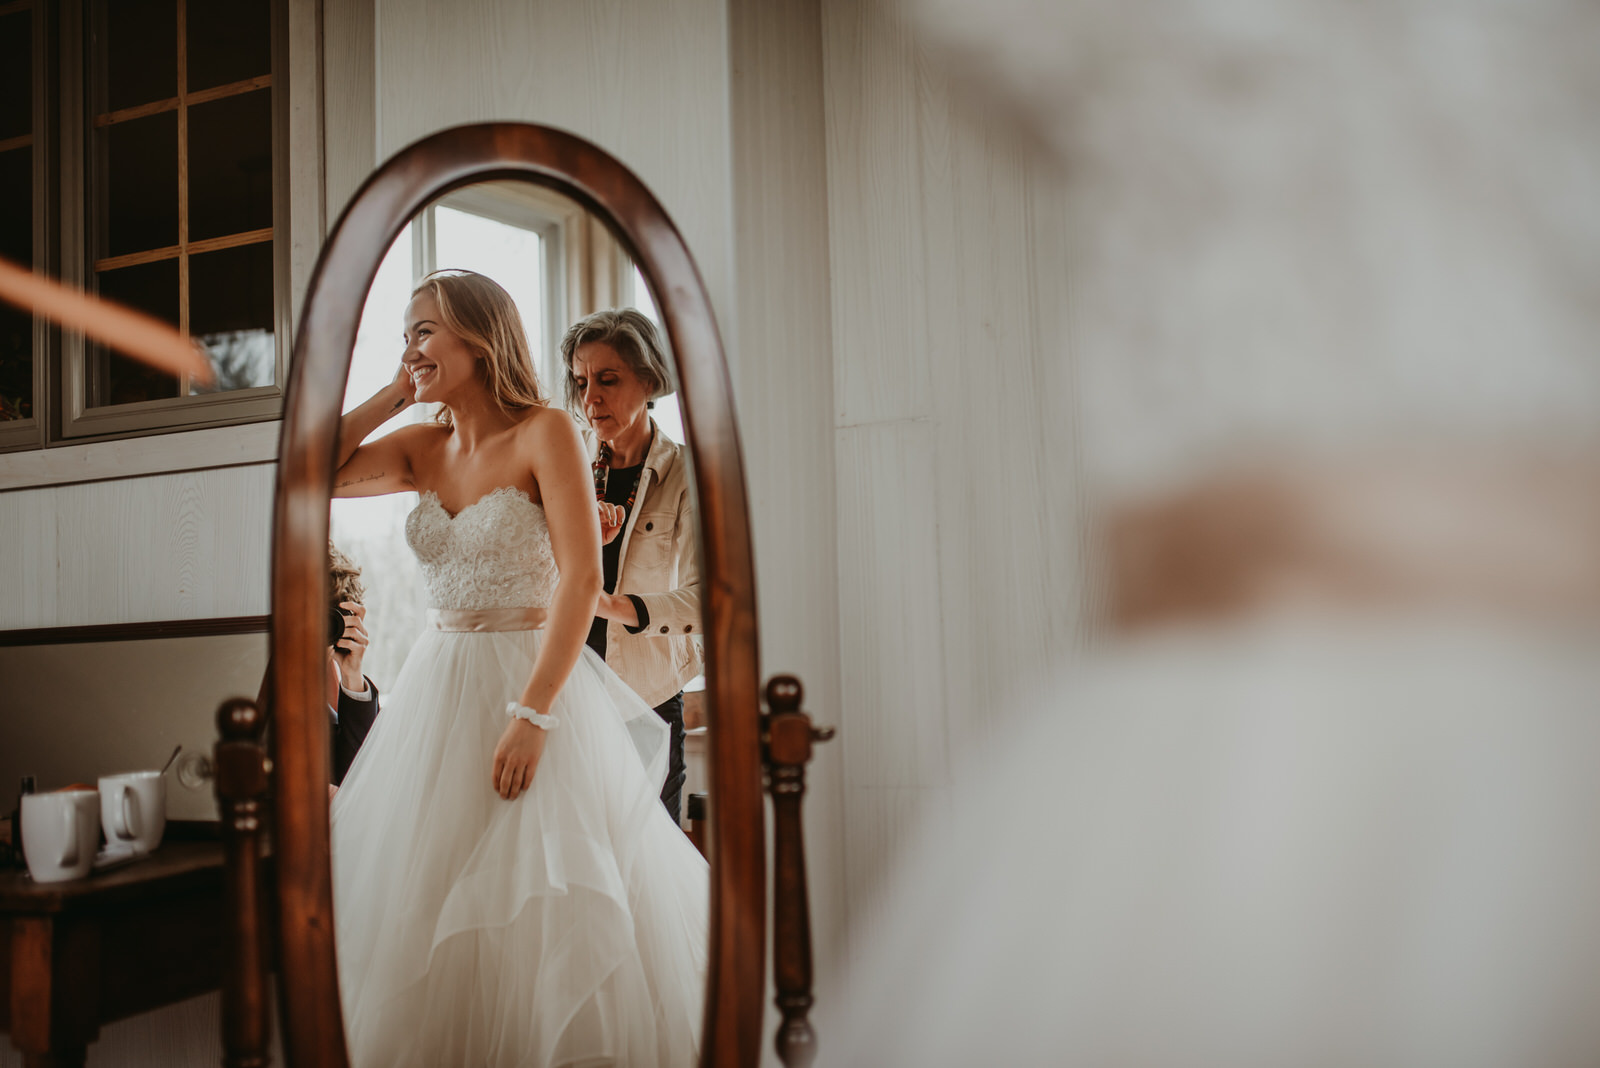 bride getting ready in front of a mirror, the cutest BHLDN dress, moody photography, Chicago wedding photography - The Adamkovi